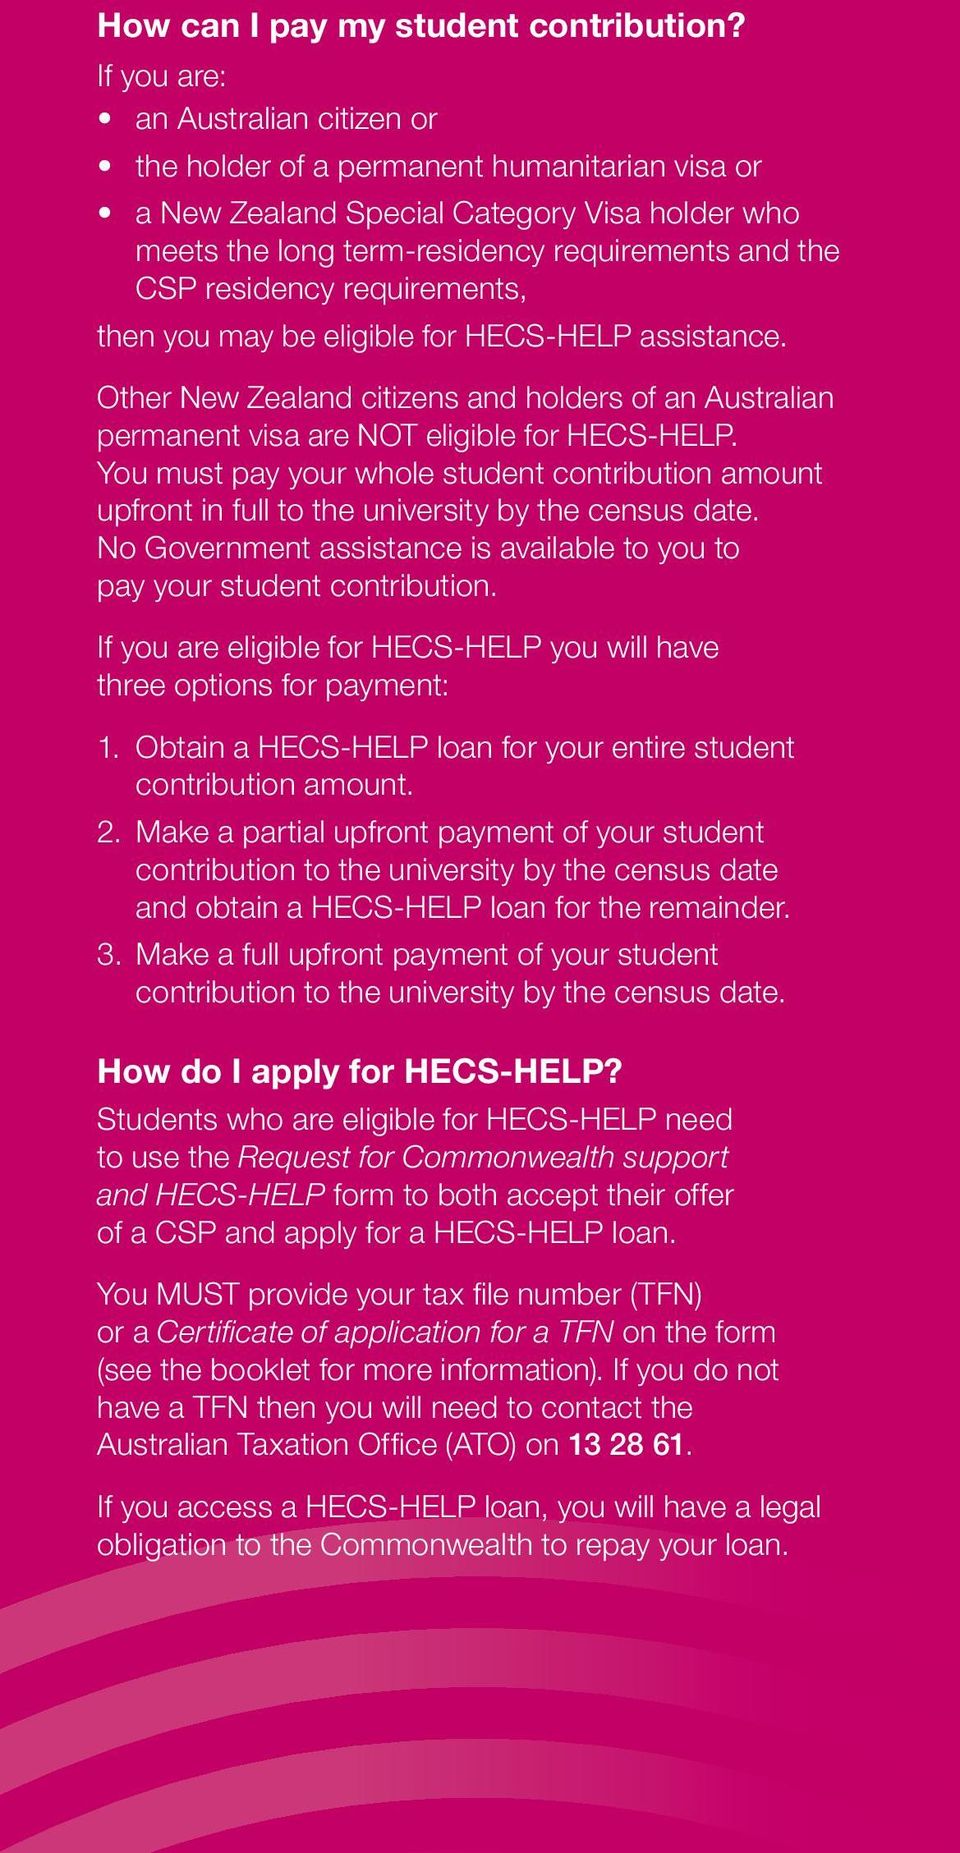 requirements, then you may be eligible for HECS-HELP assistance. Other New Zealand citizens and holders of an Australian permanent visa are NOT eligible for HECS-HELP.